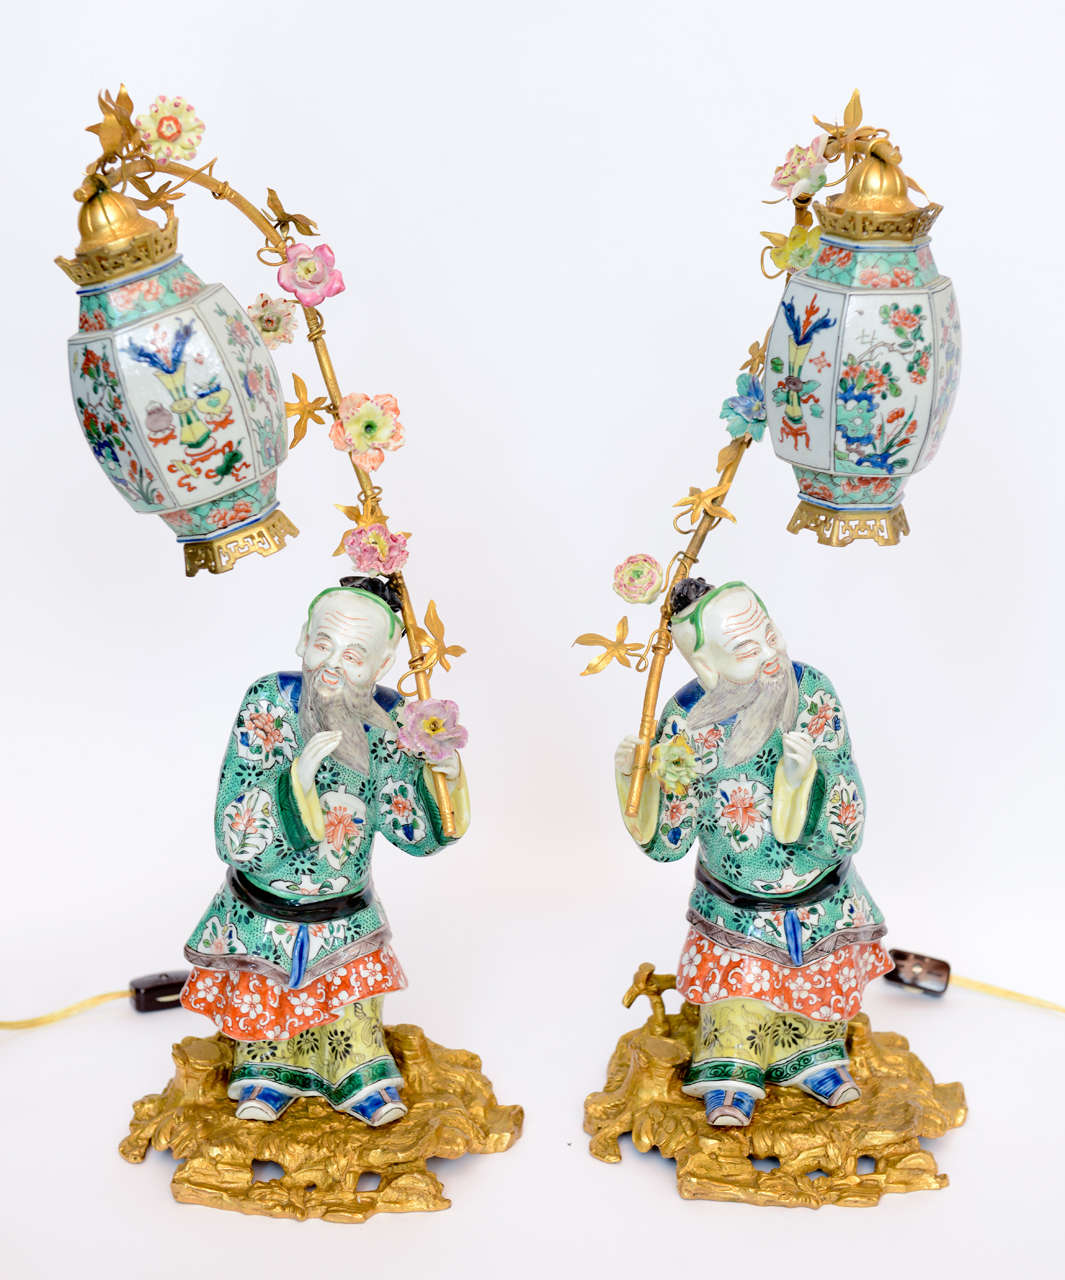 A pair of Chinese male guard figurines holding up lanterns with flowering encrusted bamboo sticks on gilt bronze bases, Circa late 19th century.